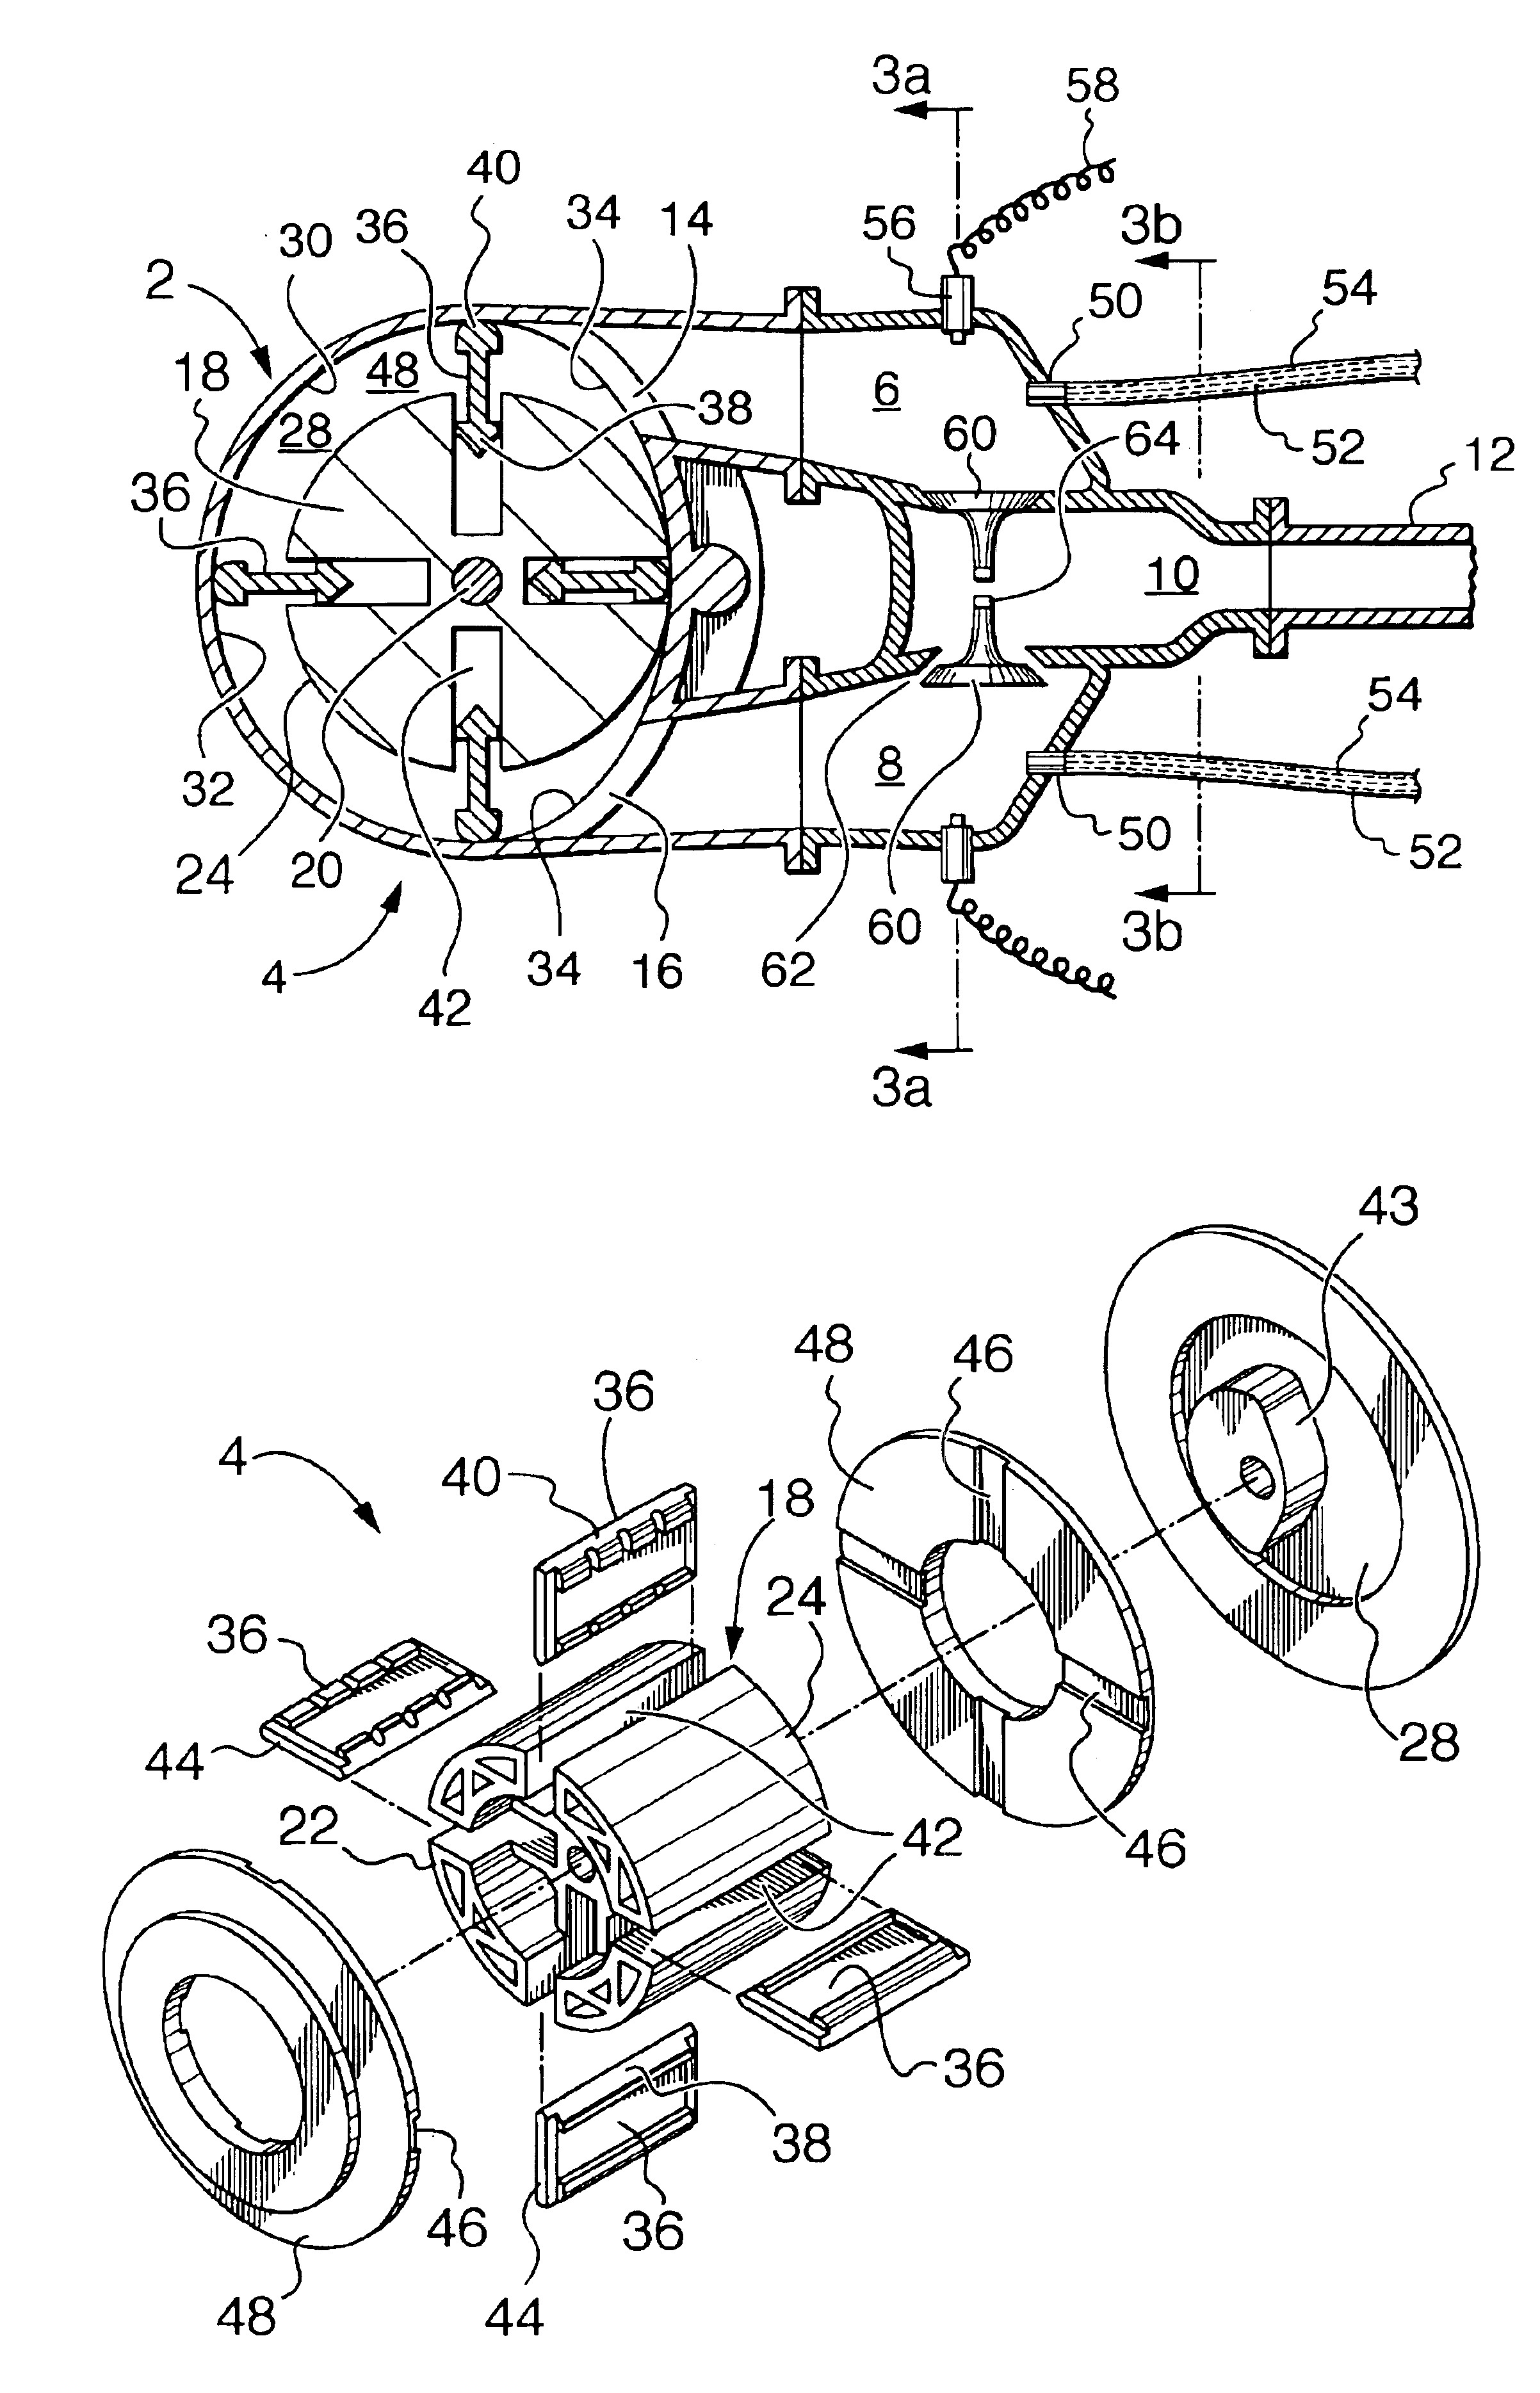 Combustion and exhaust heads for fluid turbine engines